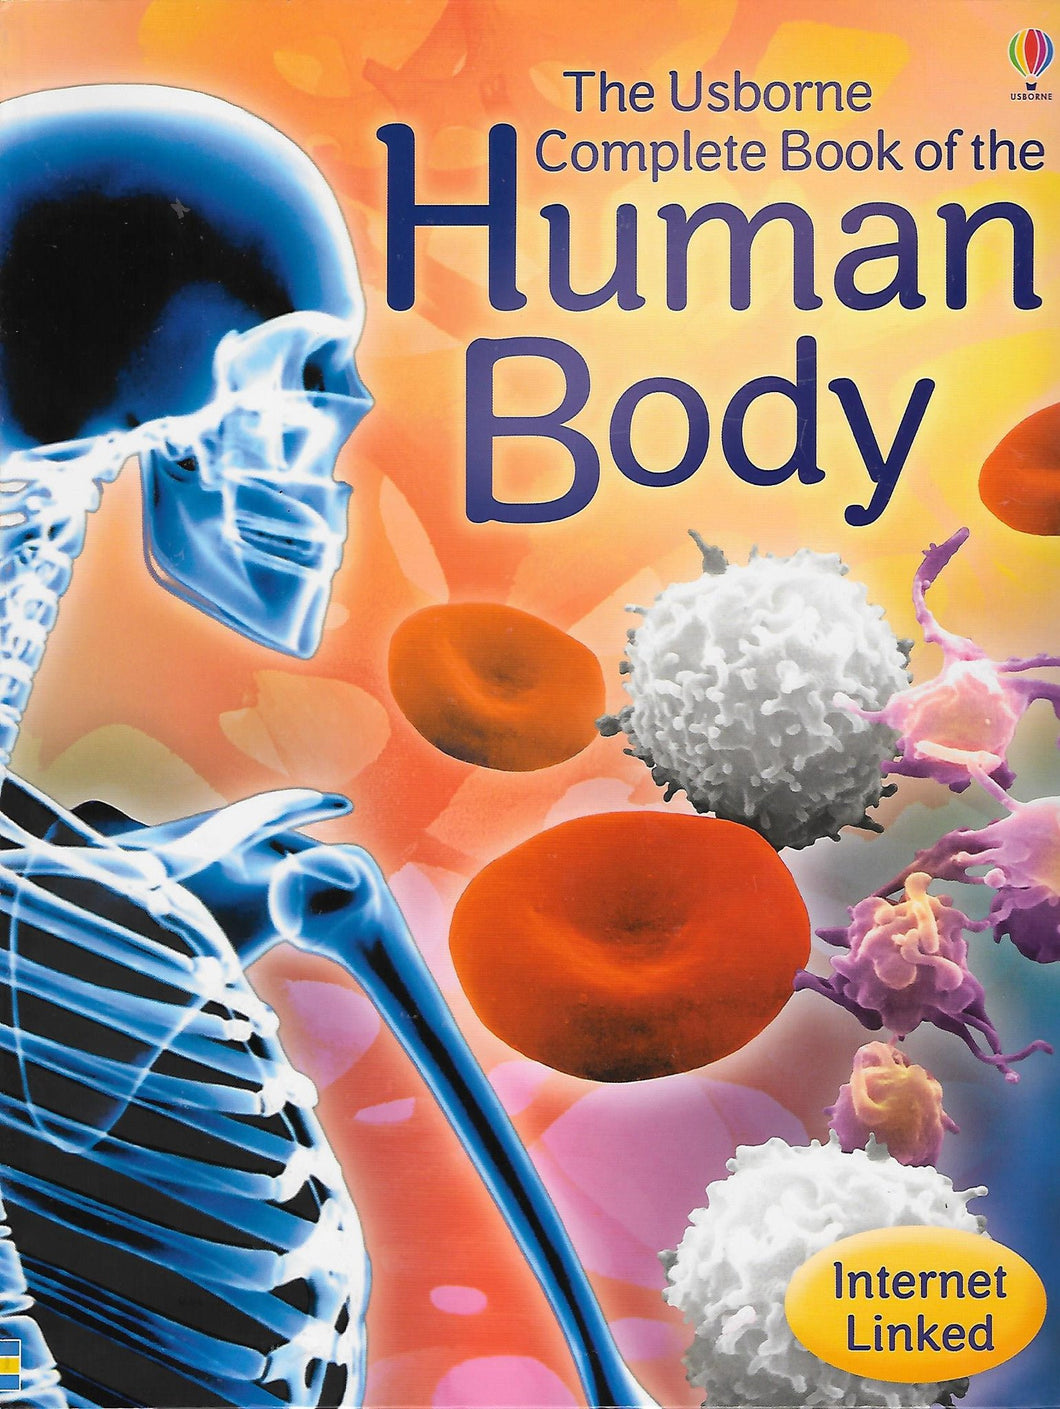 Complete Book of Human Body Illustration